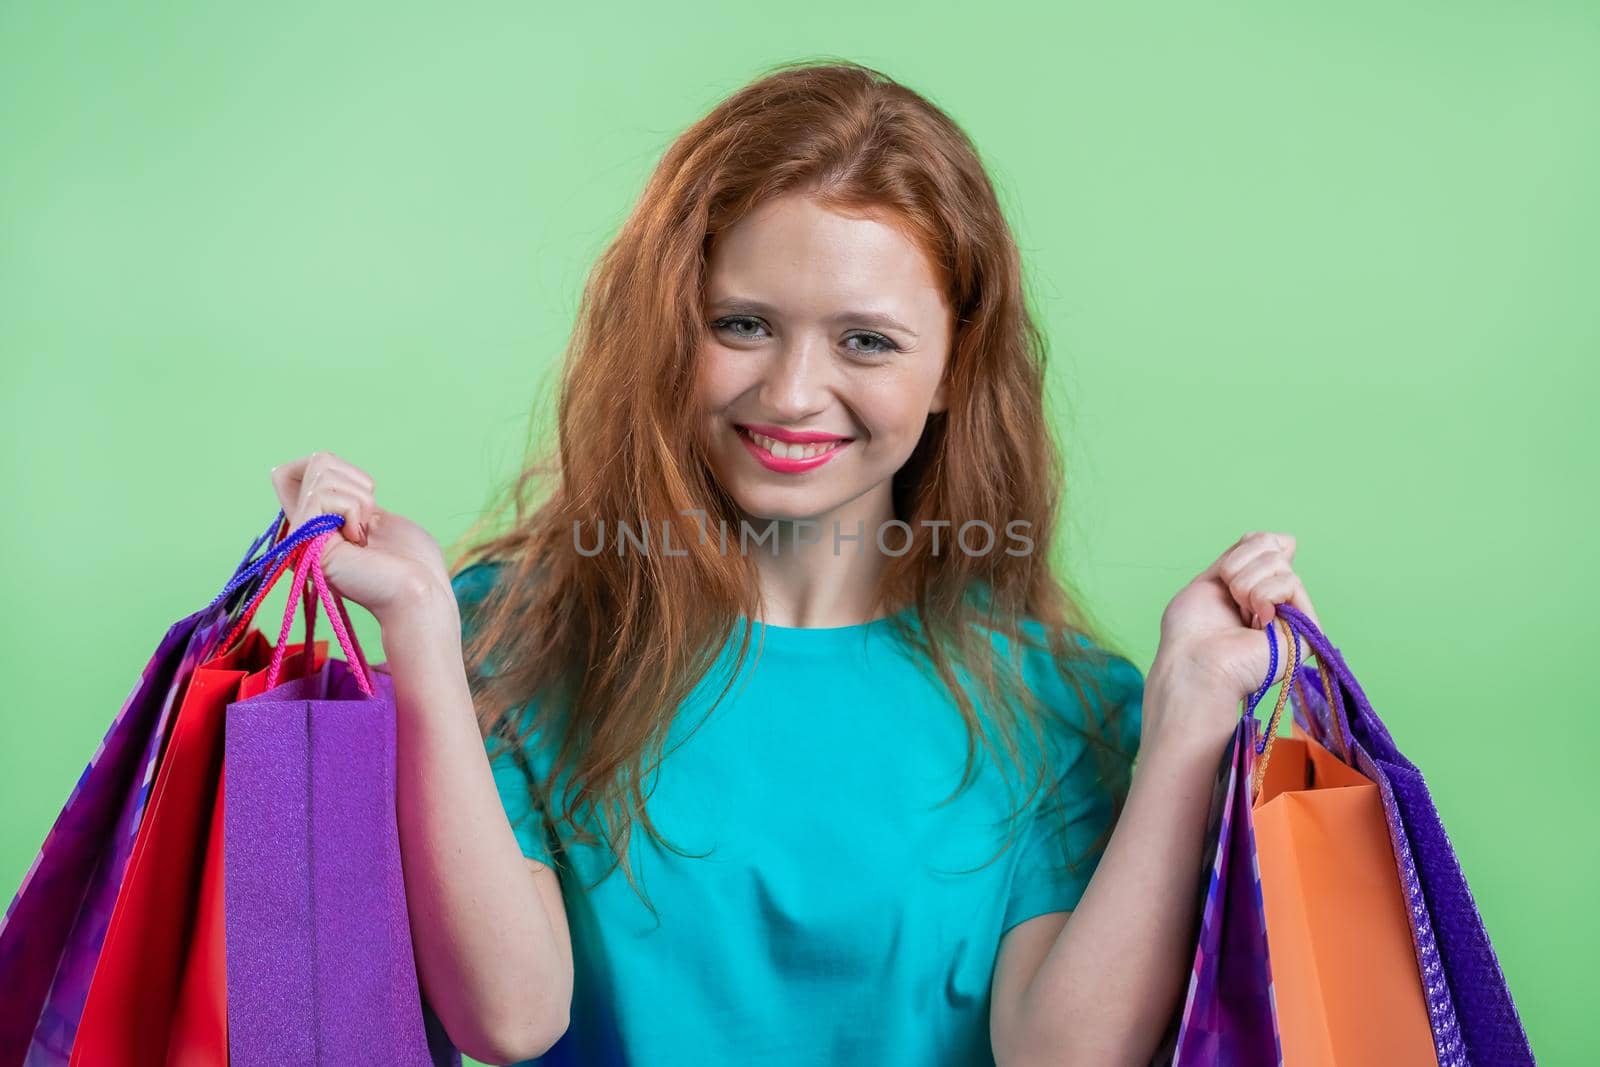 Excited woman with colorful paper bags after shopping on green studio background. Concept of seasonal sale, purchases, spending money on gifts. High quality photo